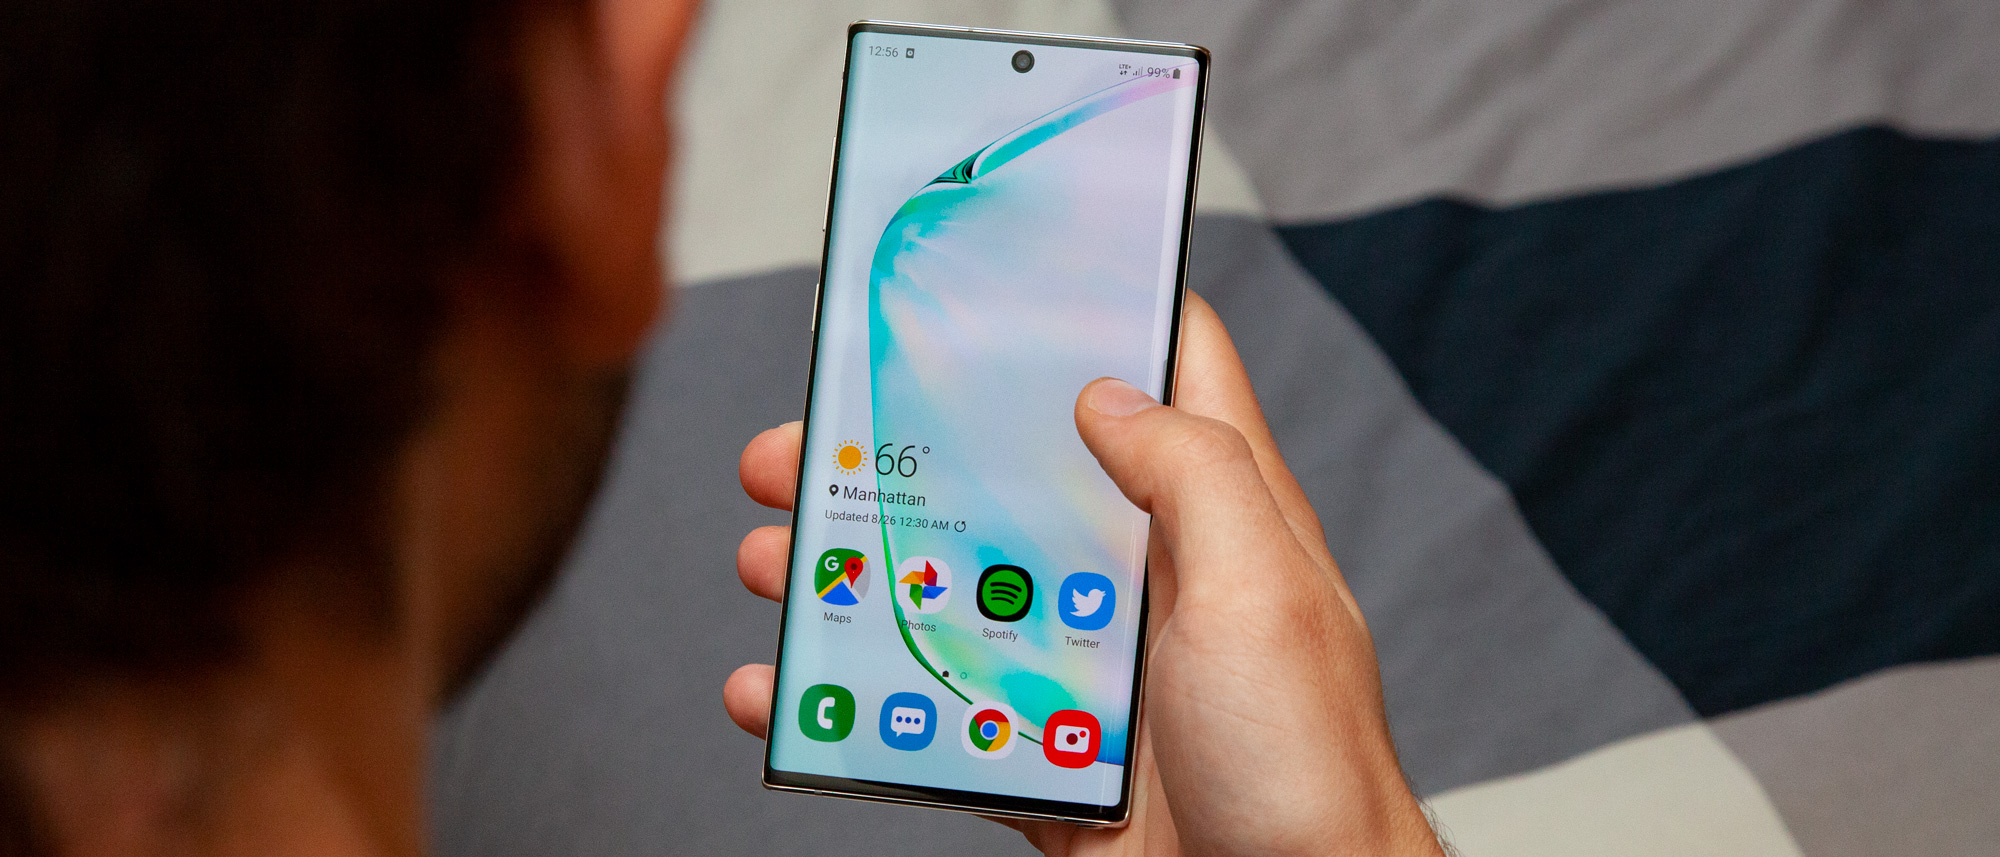 Samsung Galaxy Note 10 review: The best Galaxy phone to buy right now - CNET